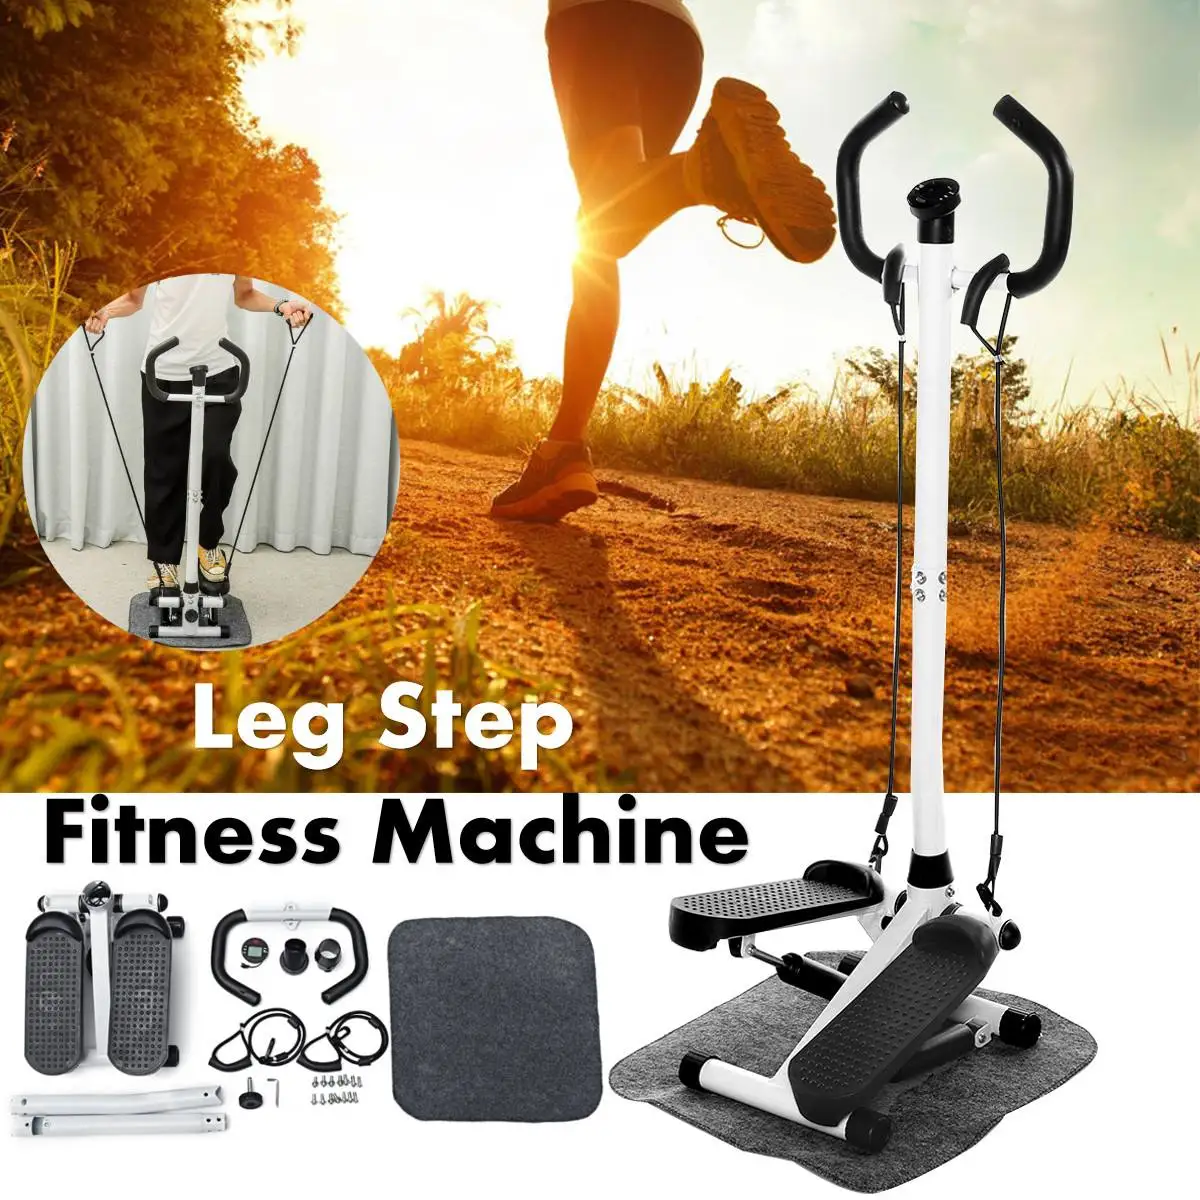 

Multifunctional Indoor Stepper Home Gym Weight-loss Leg Fitness Step Machine LCD Monitor Handle Bar Work Adjustable Height